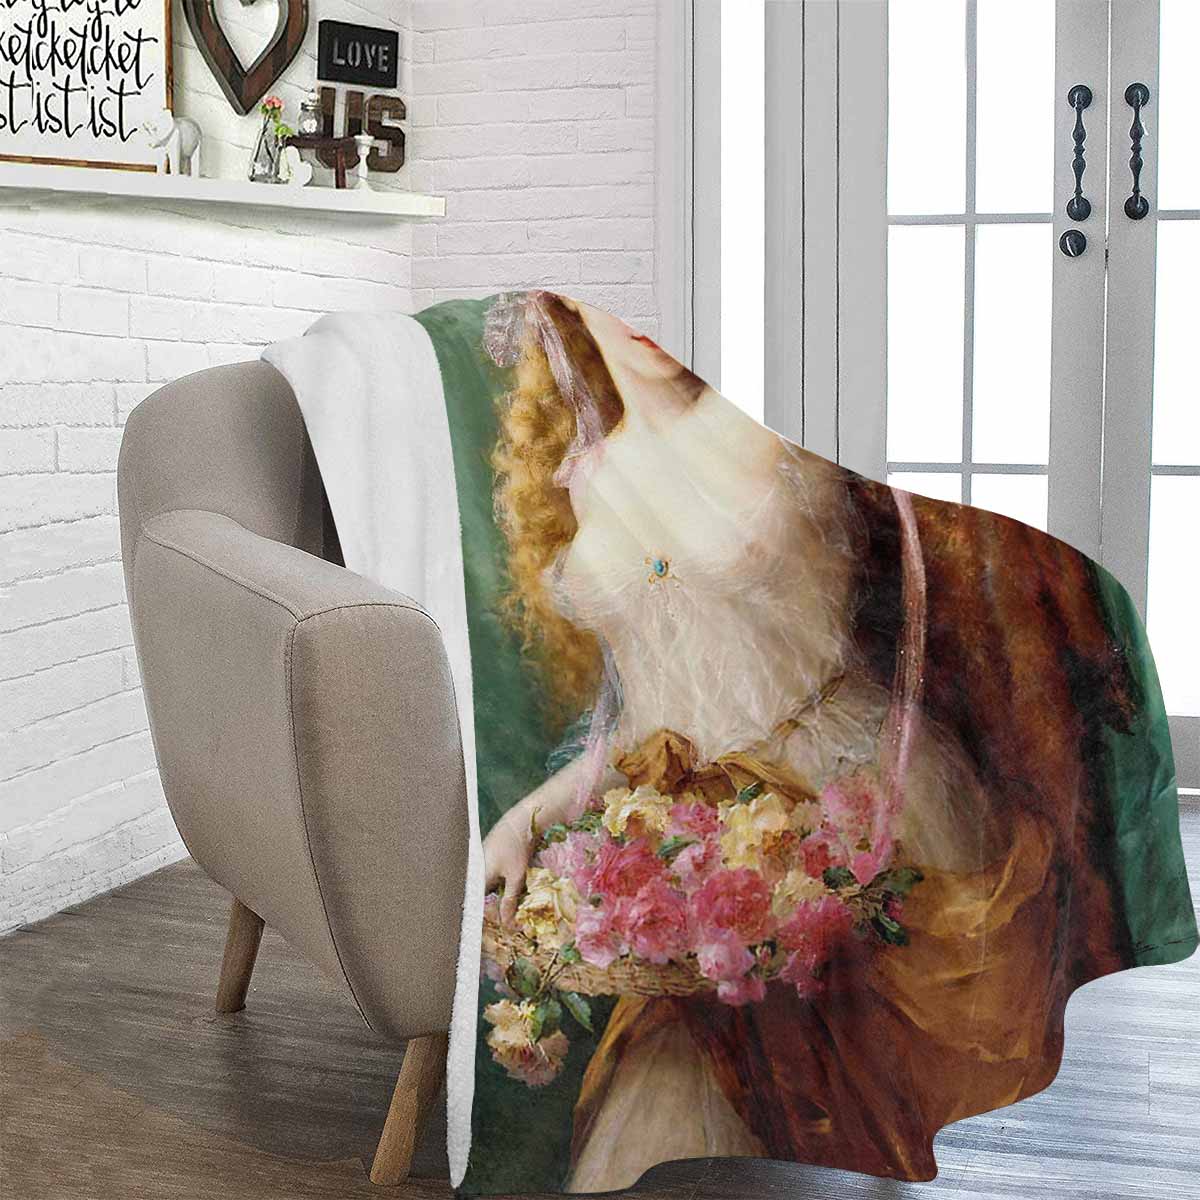 Victorian Lady Design BLANKET, LARGE 60 in x 80 in, Basket of Roses